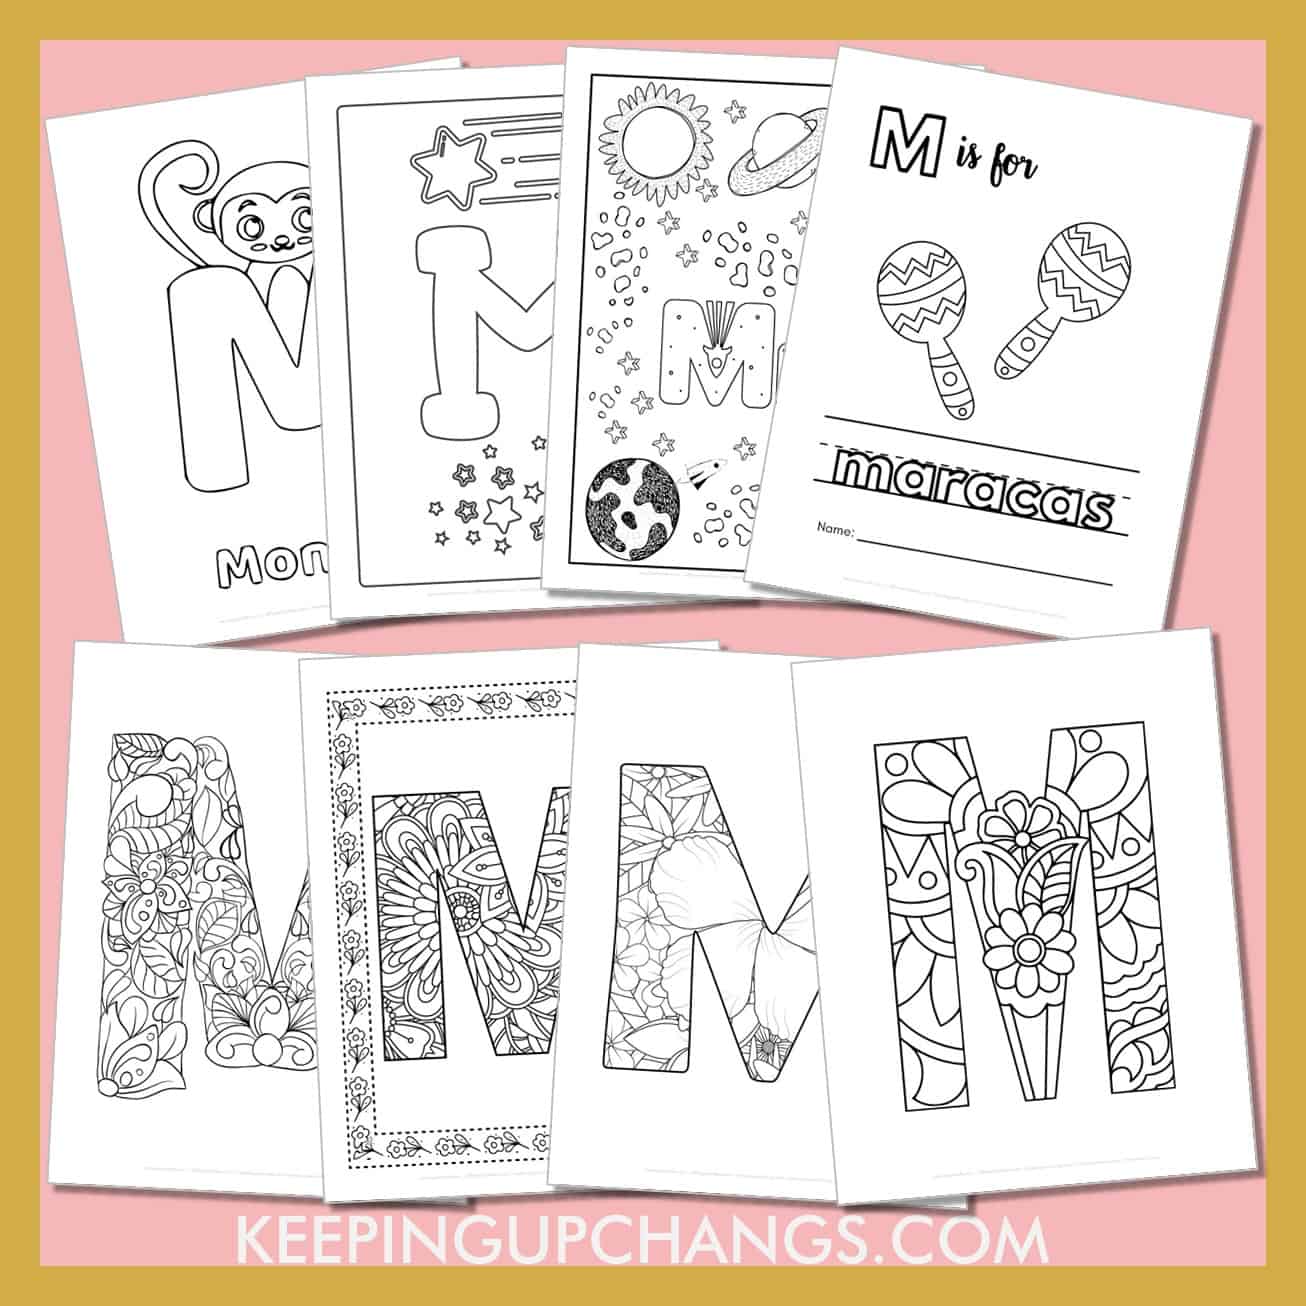 free alphabet letter m to color for toddlers, preschool, kindergarten, to adults.